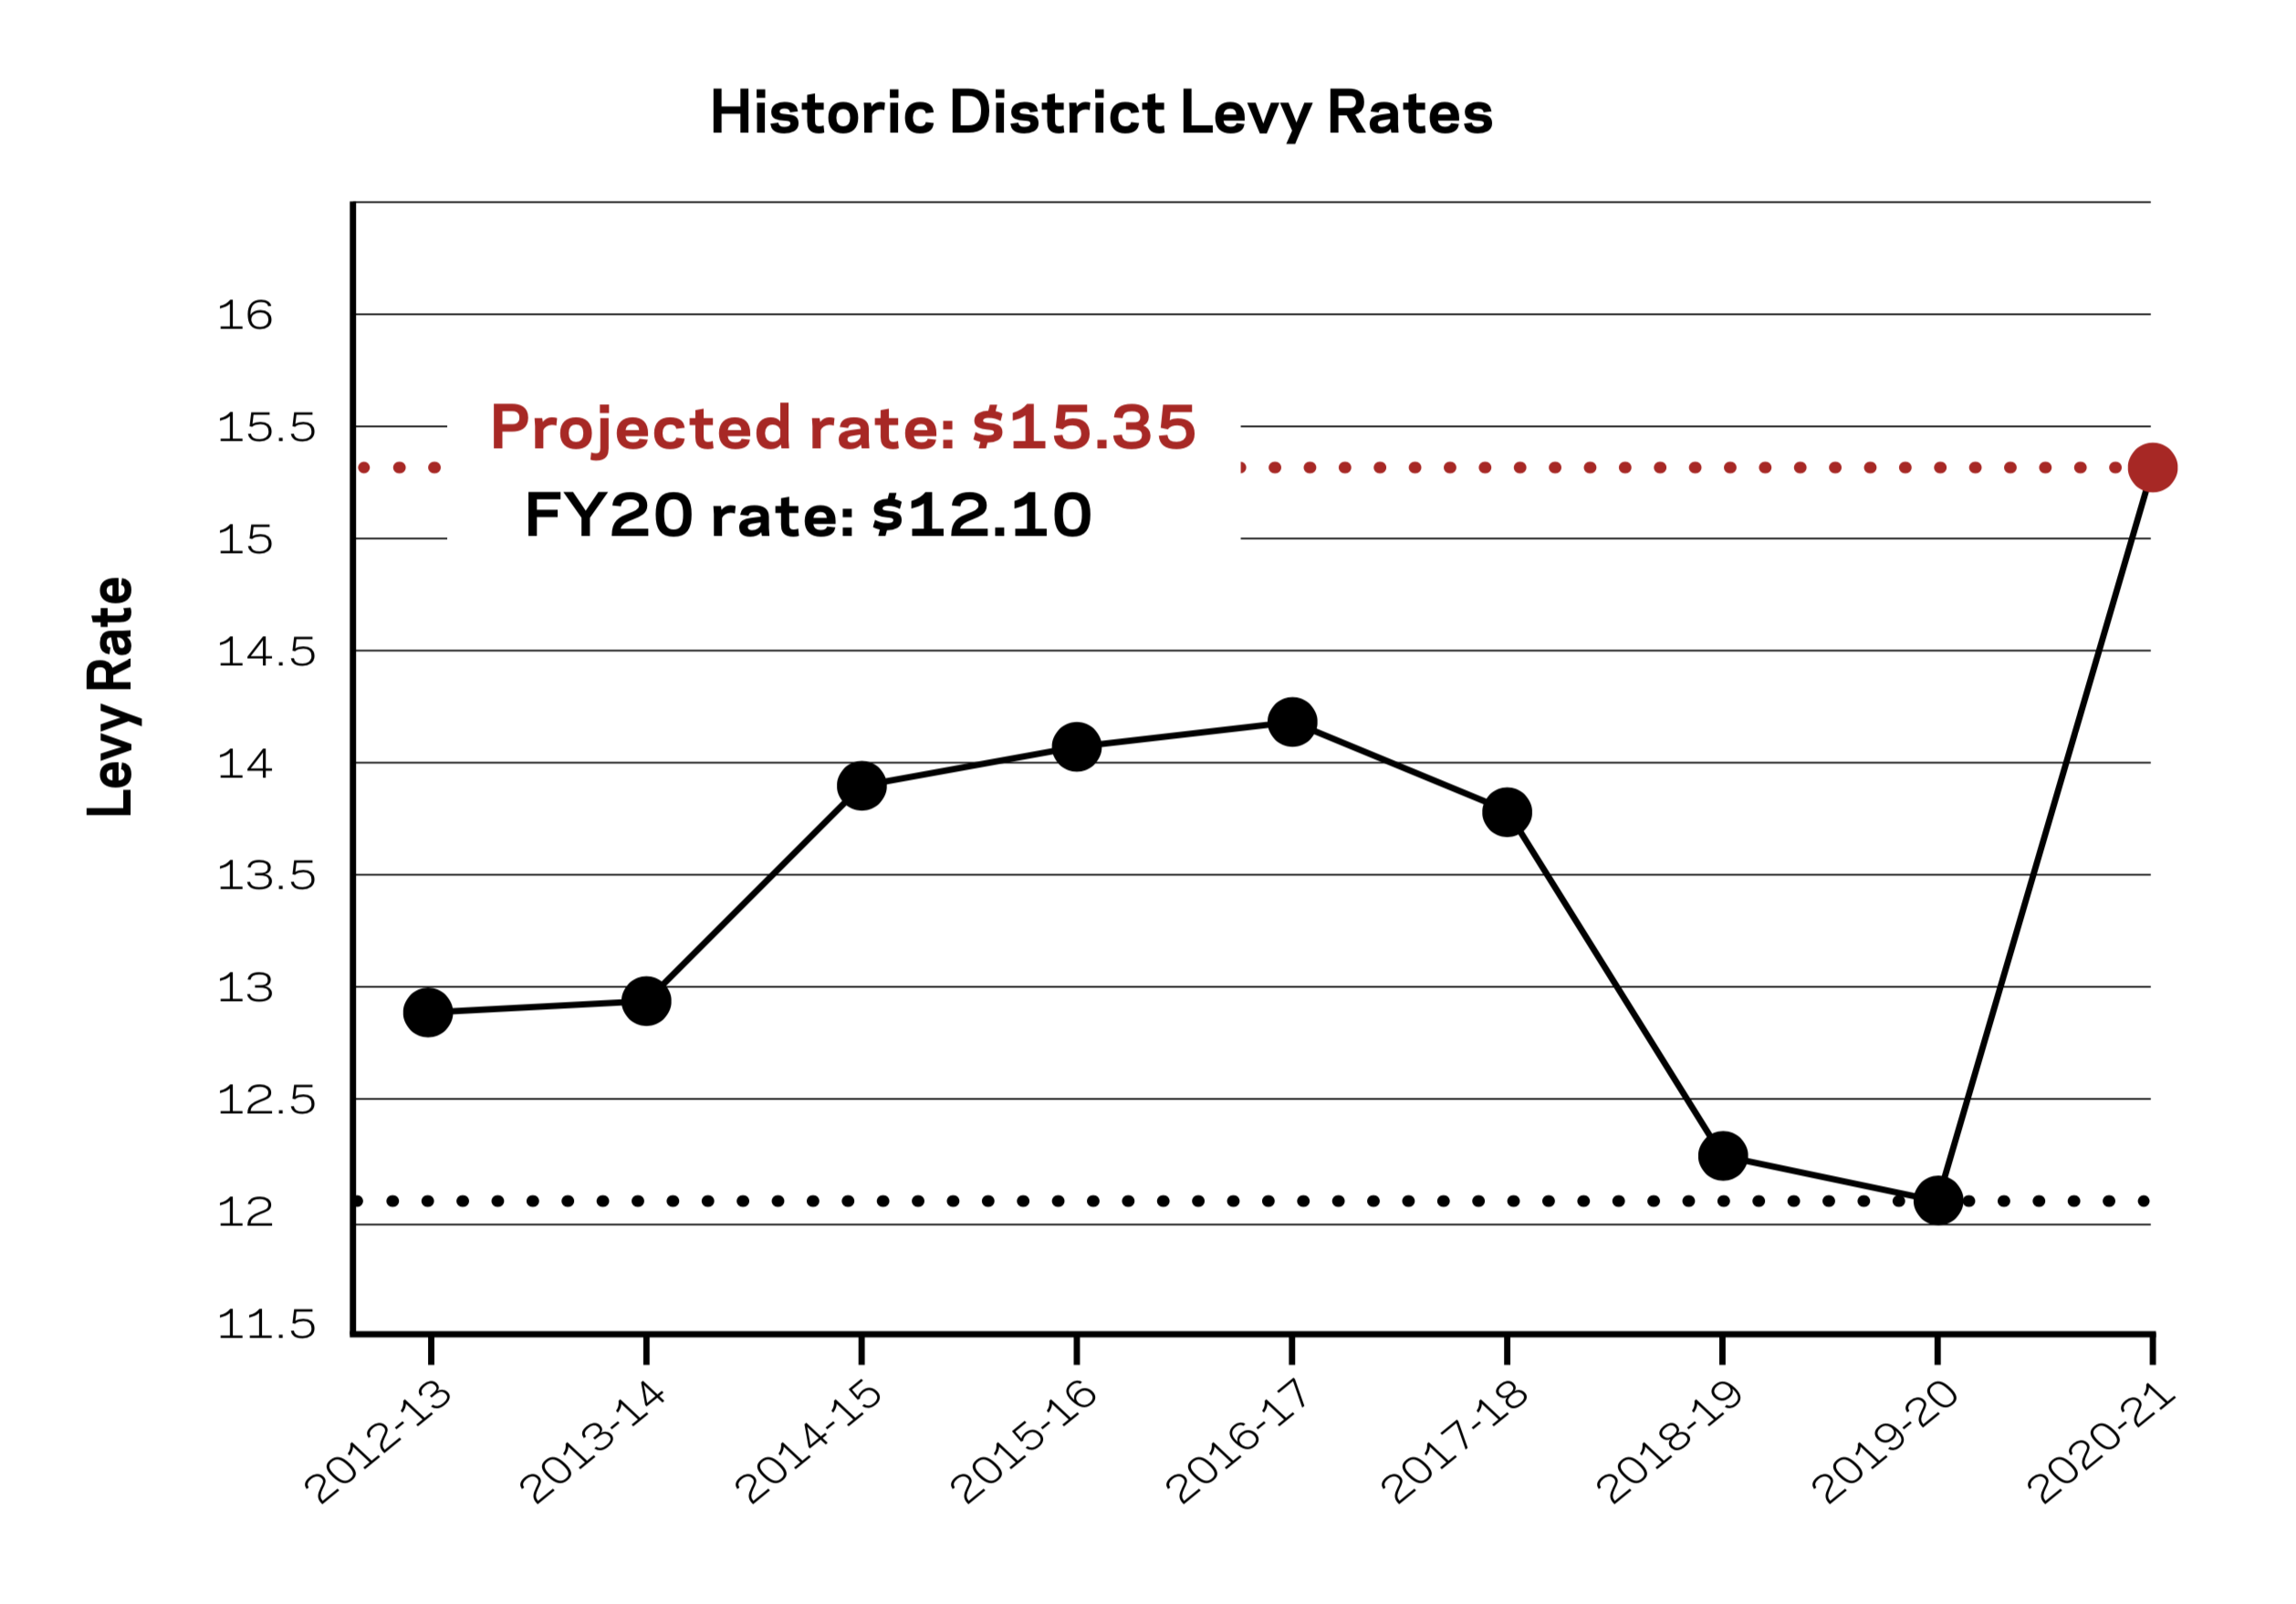 Historic District Levy Rates chart